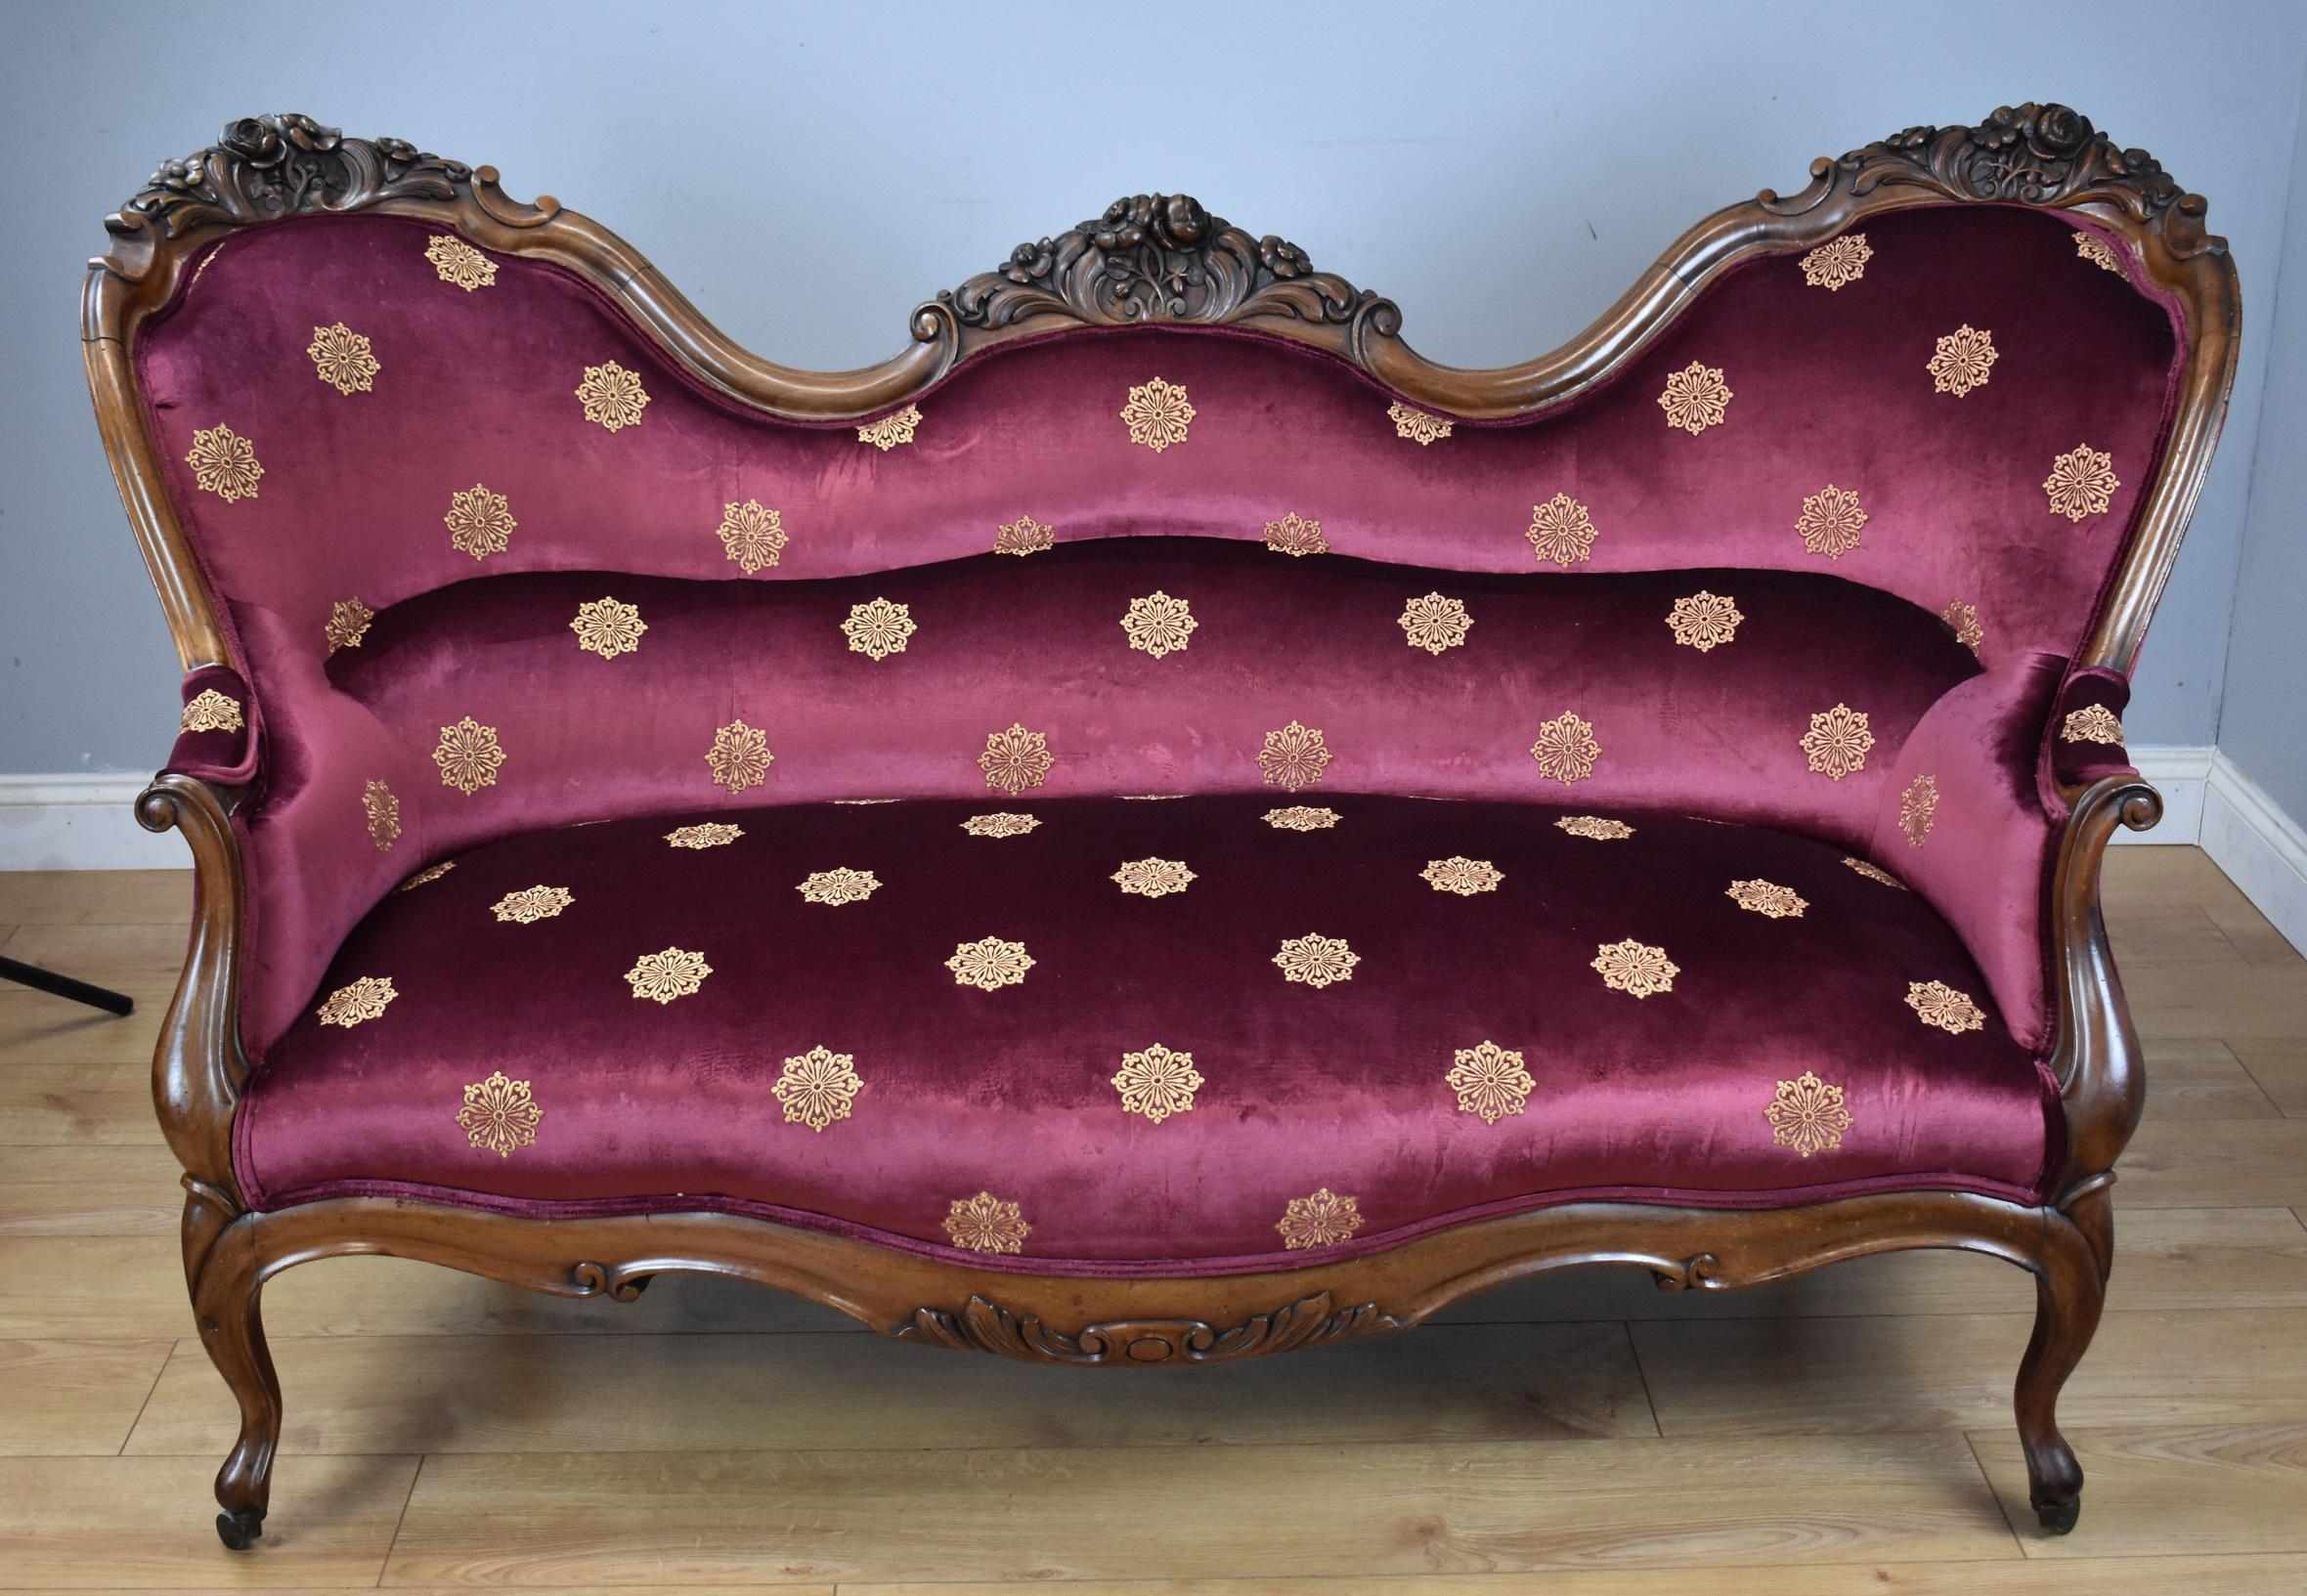 For sale is a good quality Victorian walnut framed settee. Having an ornately carved and shaped frame, standing on elegant legs raised on original brass castors, this piece remains structurally sound and is in very good condition for its age. All of